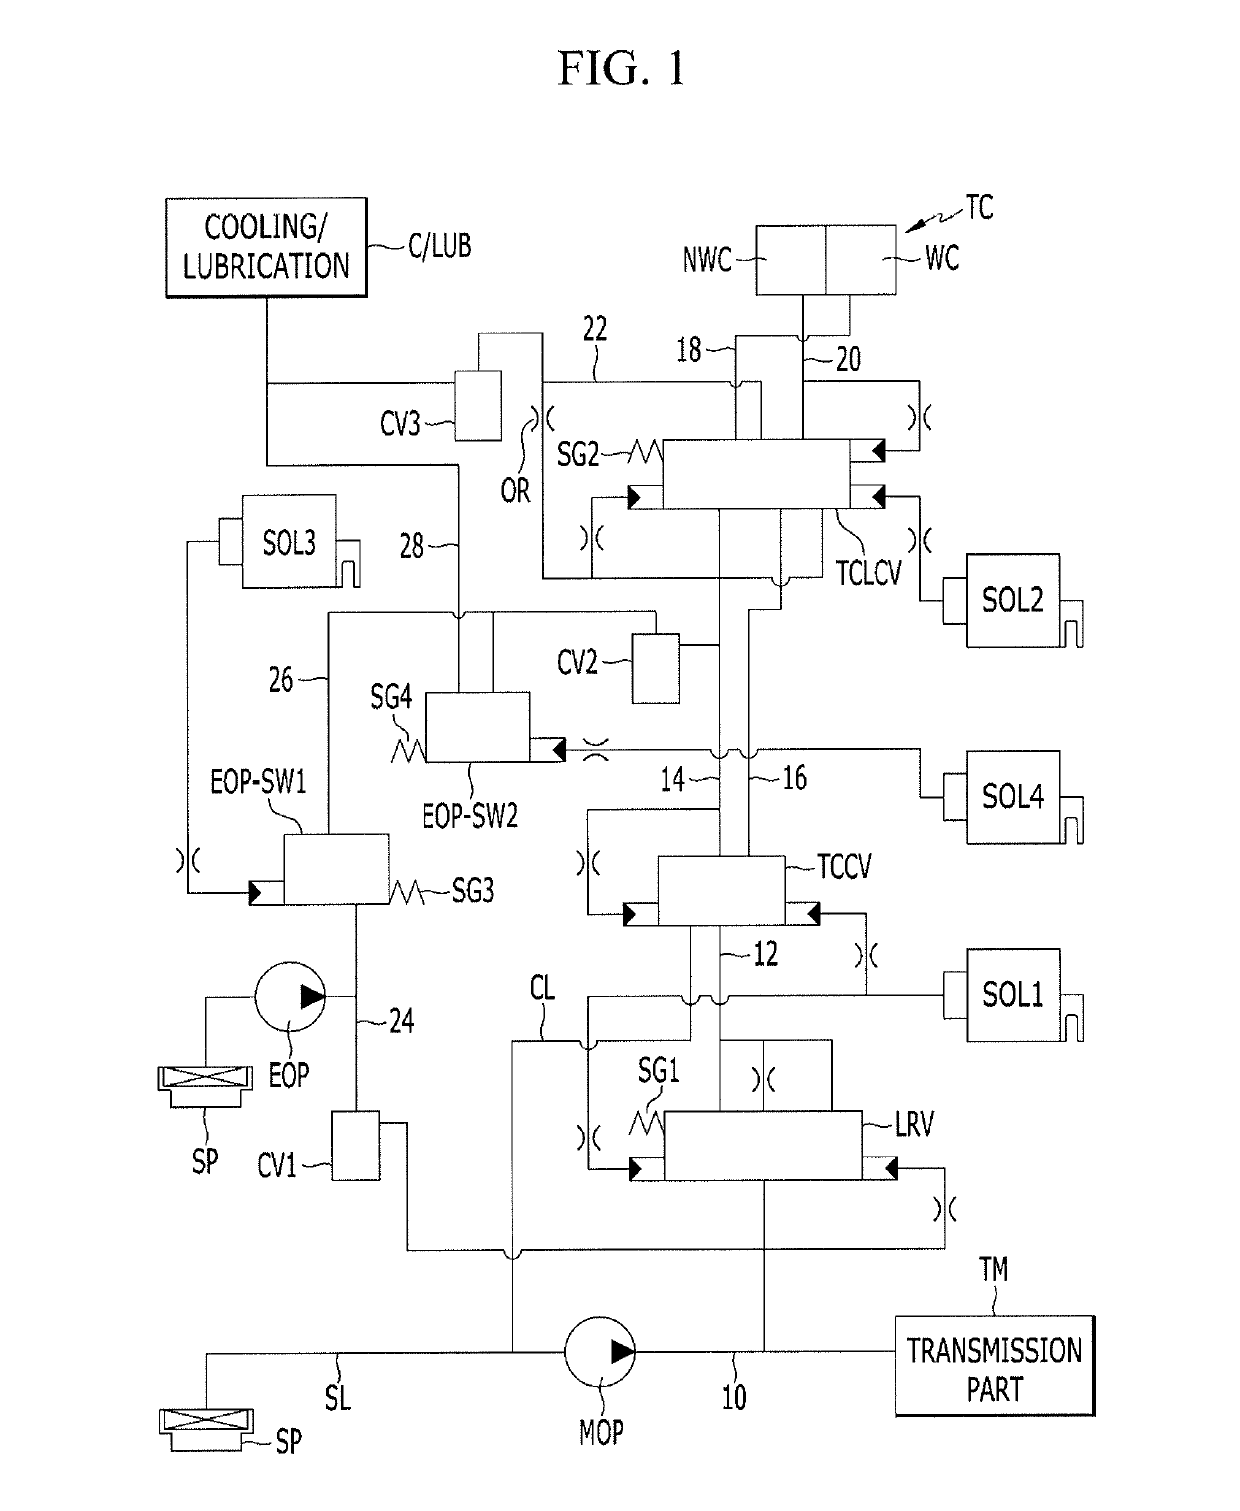 Oil pressure supply system of automatic transmission